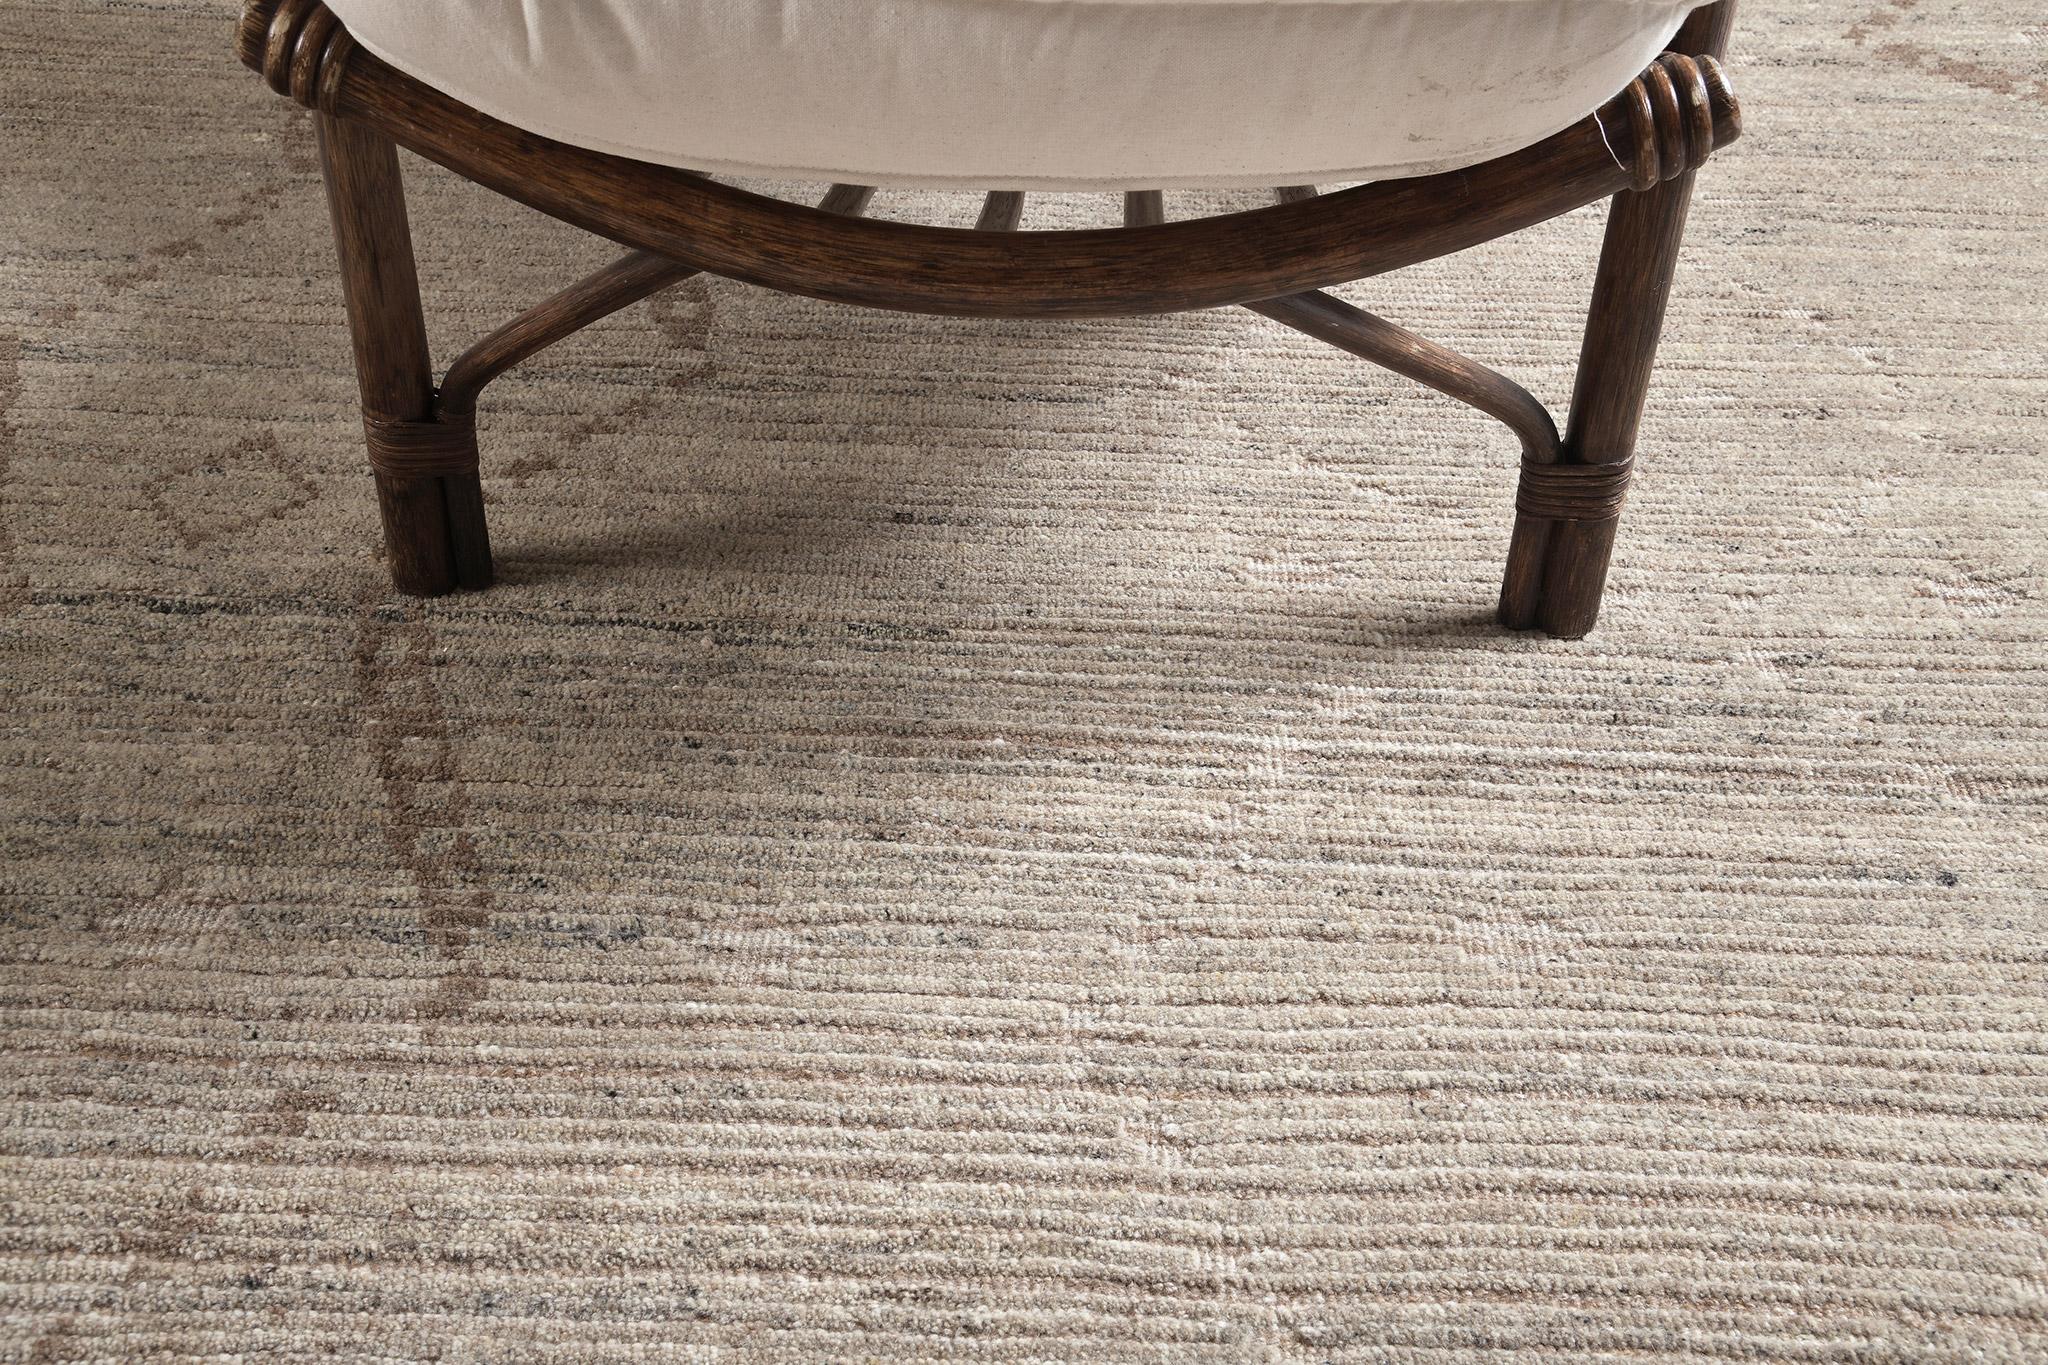 Albarino in Estancia Collection features an all over aesthetic pattern in light fawn and british tan. Lozenge patterns are featured in this mesmerizing rug representing The Eye in ancient Berber motifs that wards off the evil eye. Classy yet